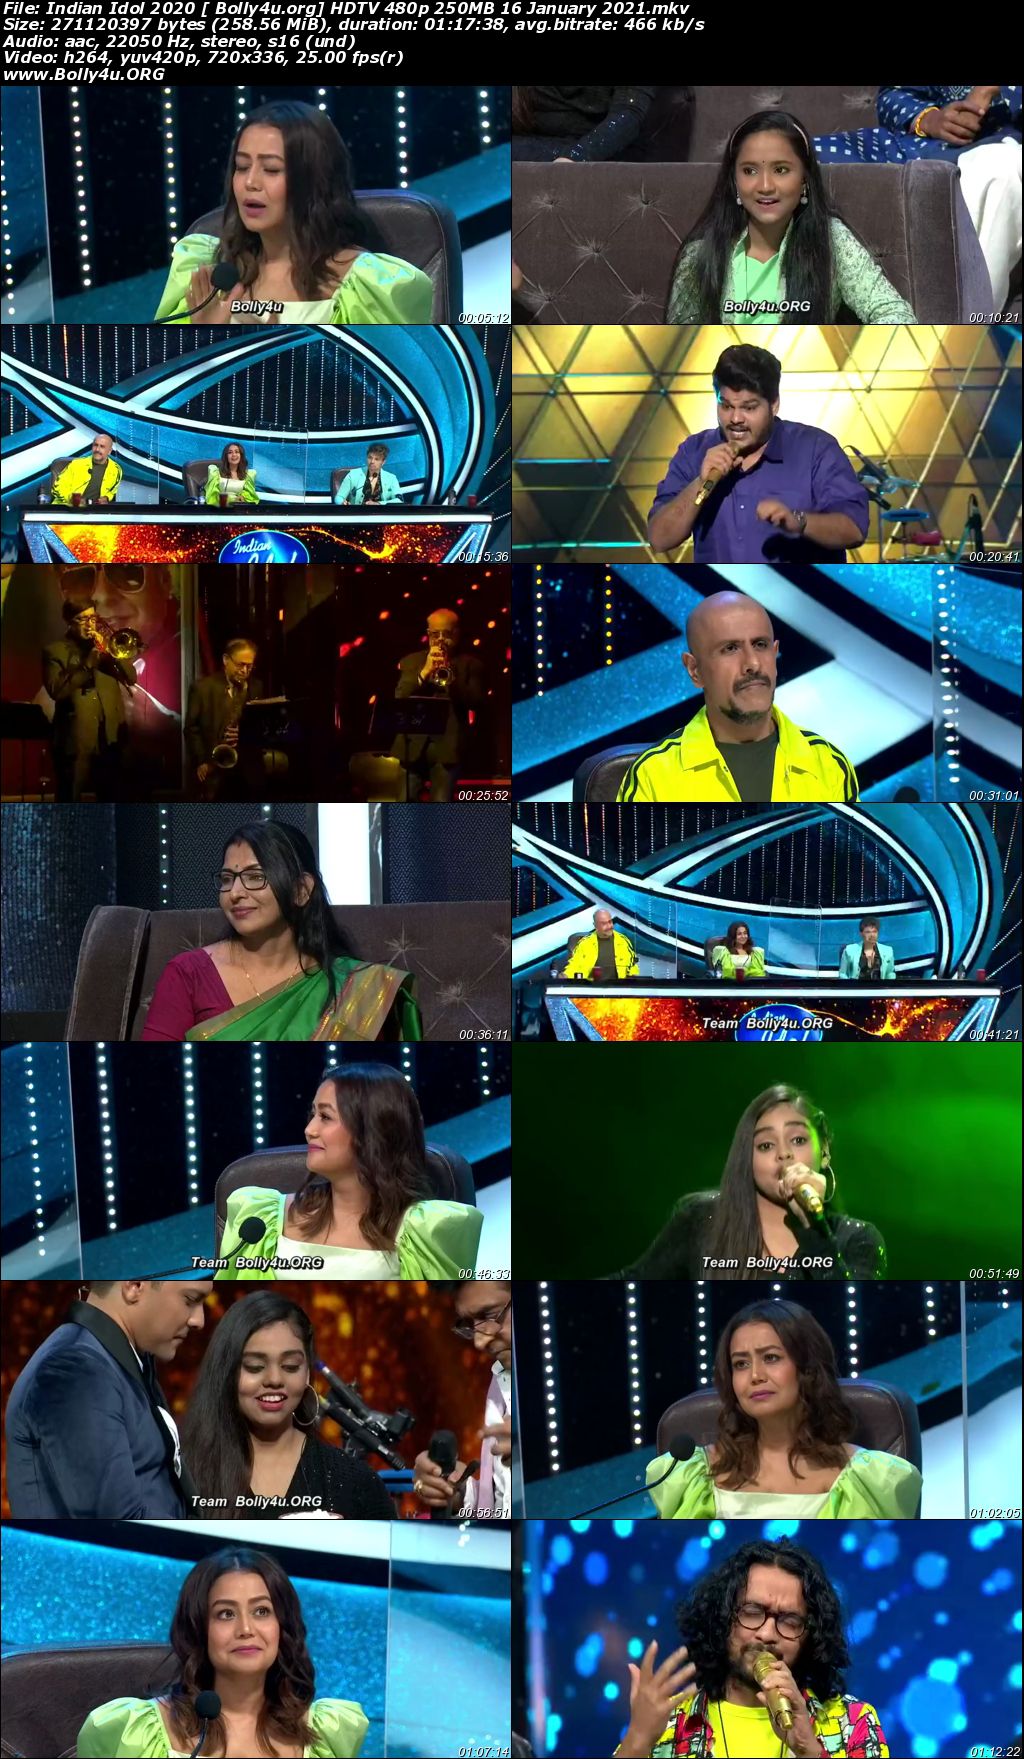 Indian Idol 2020 HDTV 480p 250MB 16 January 2021 Download